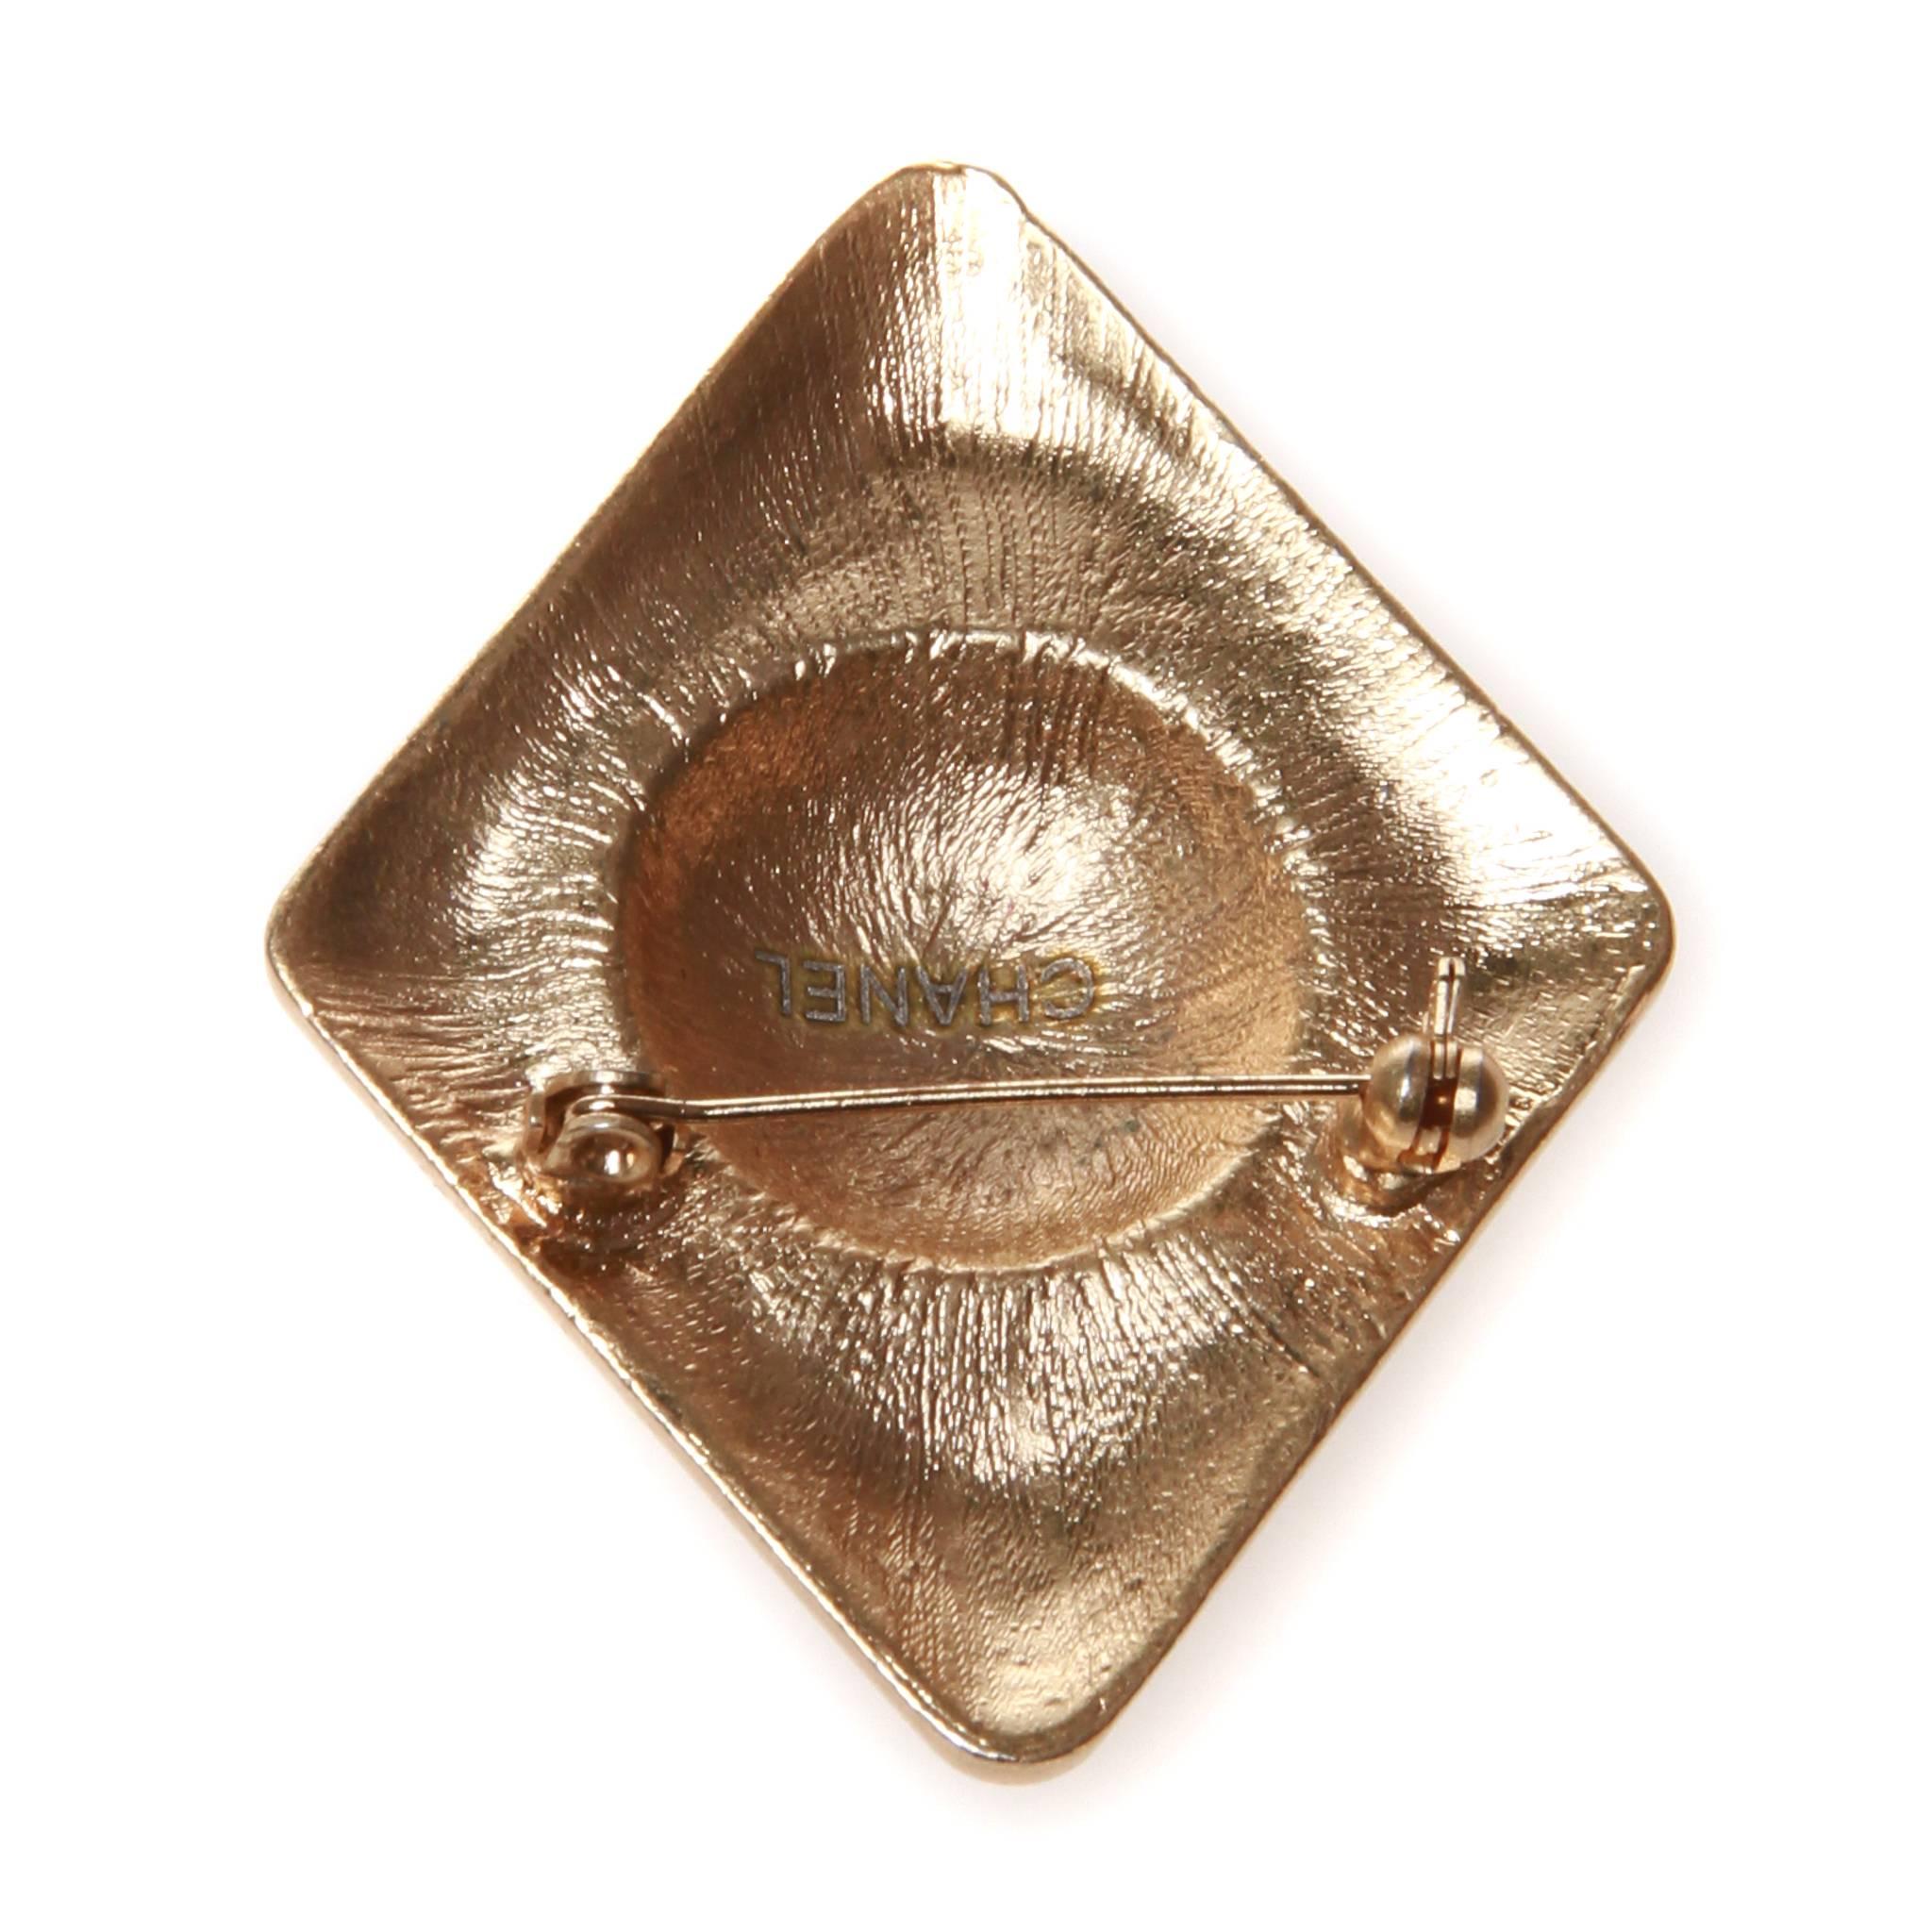 Diamond shaped Chanel brooch featuring a simple CC centred design in bright but matte gold-tone metal. 

roll needle at back

no box